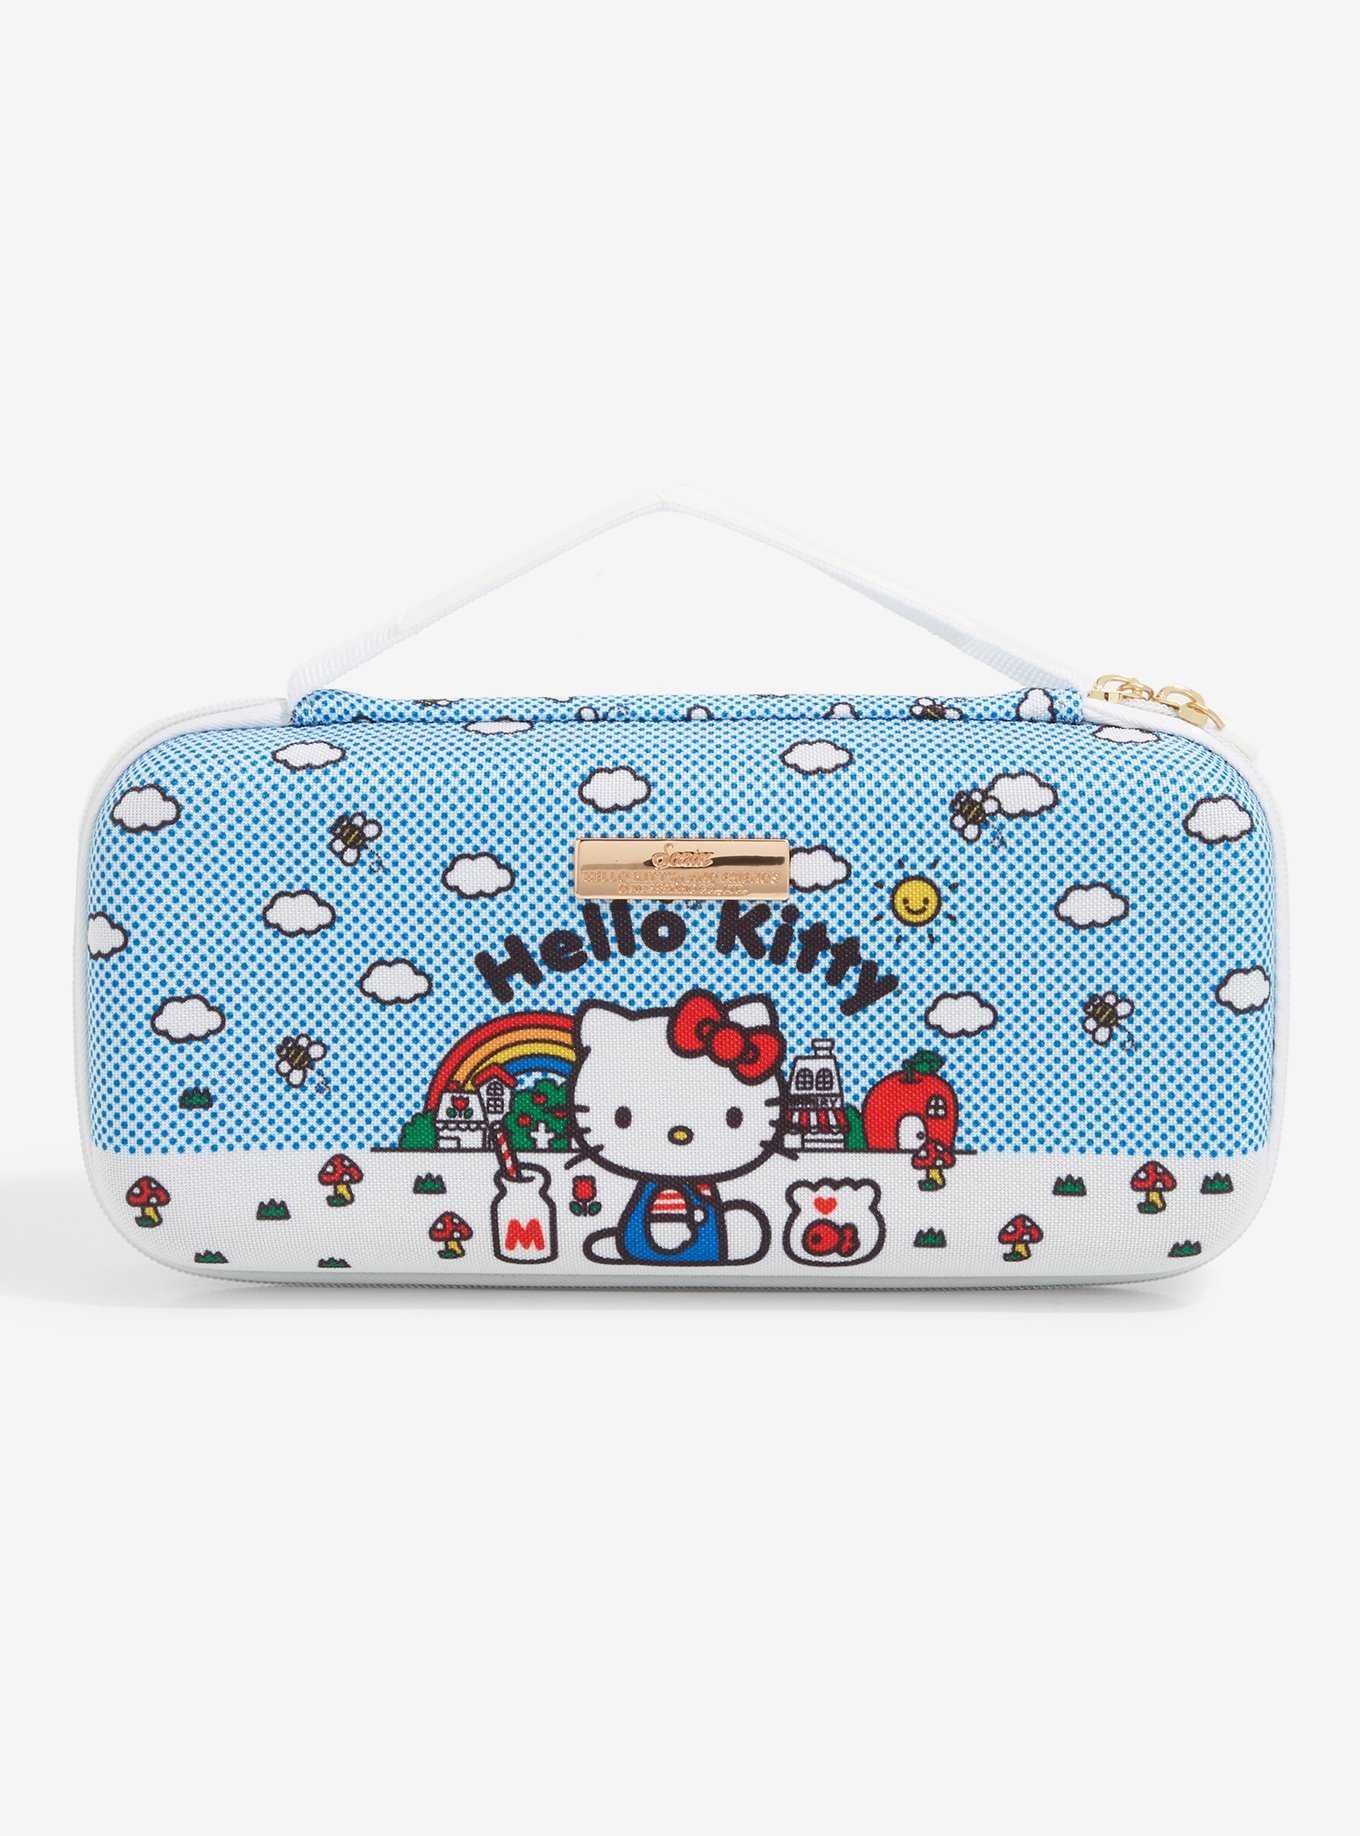 Funny Zipper Pencil Case Classic Colorful Stationery Storage Pouch